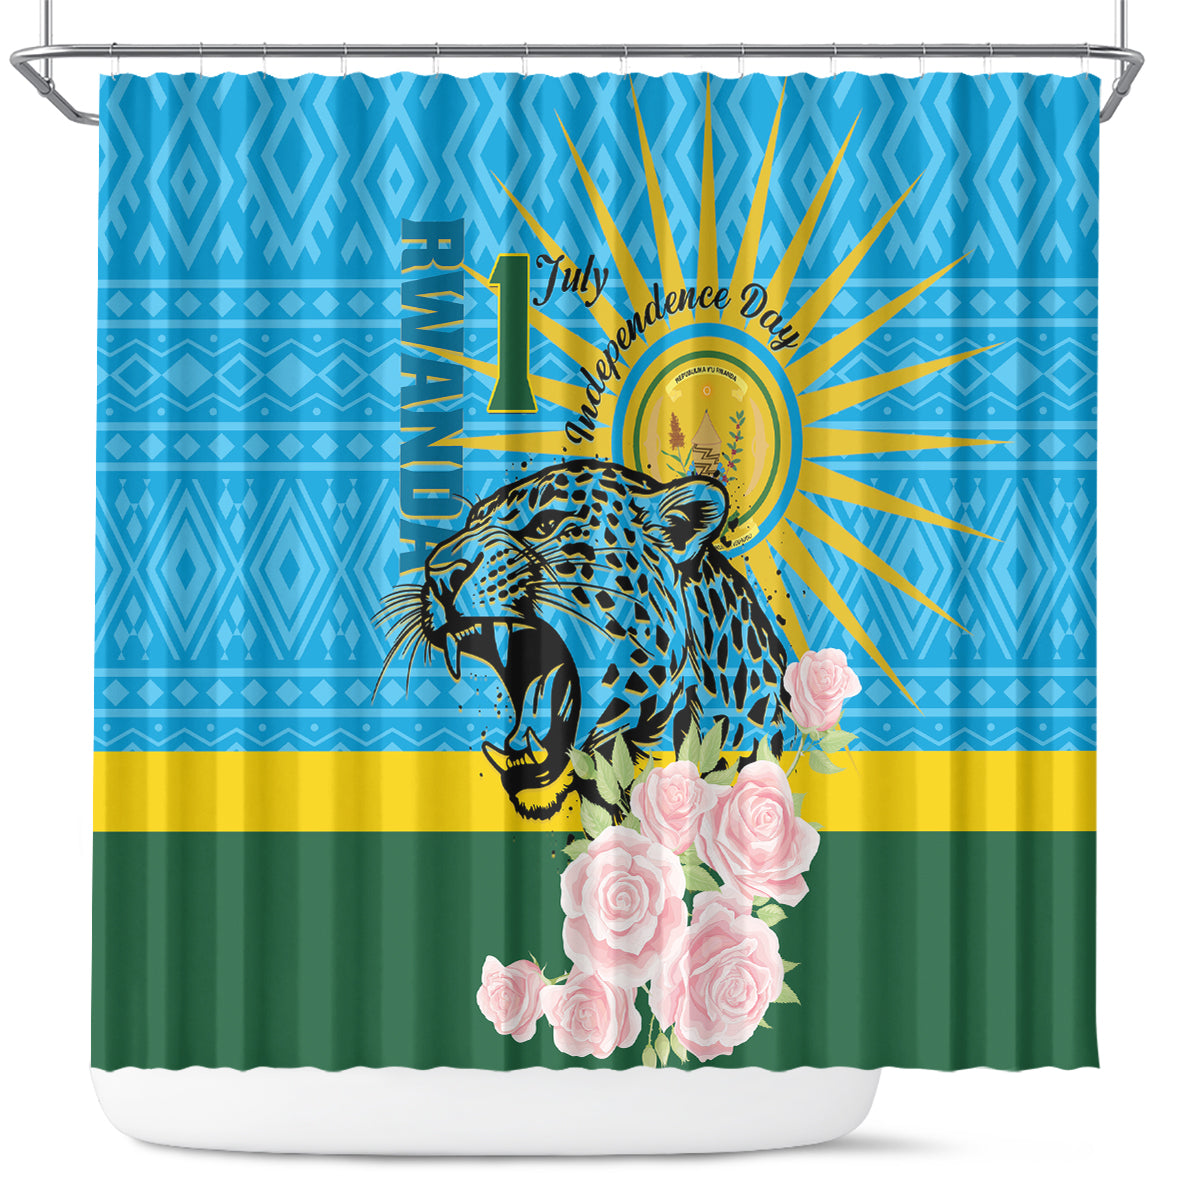 Rwanda Independence Day Shower Curtain Leopard With Roses